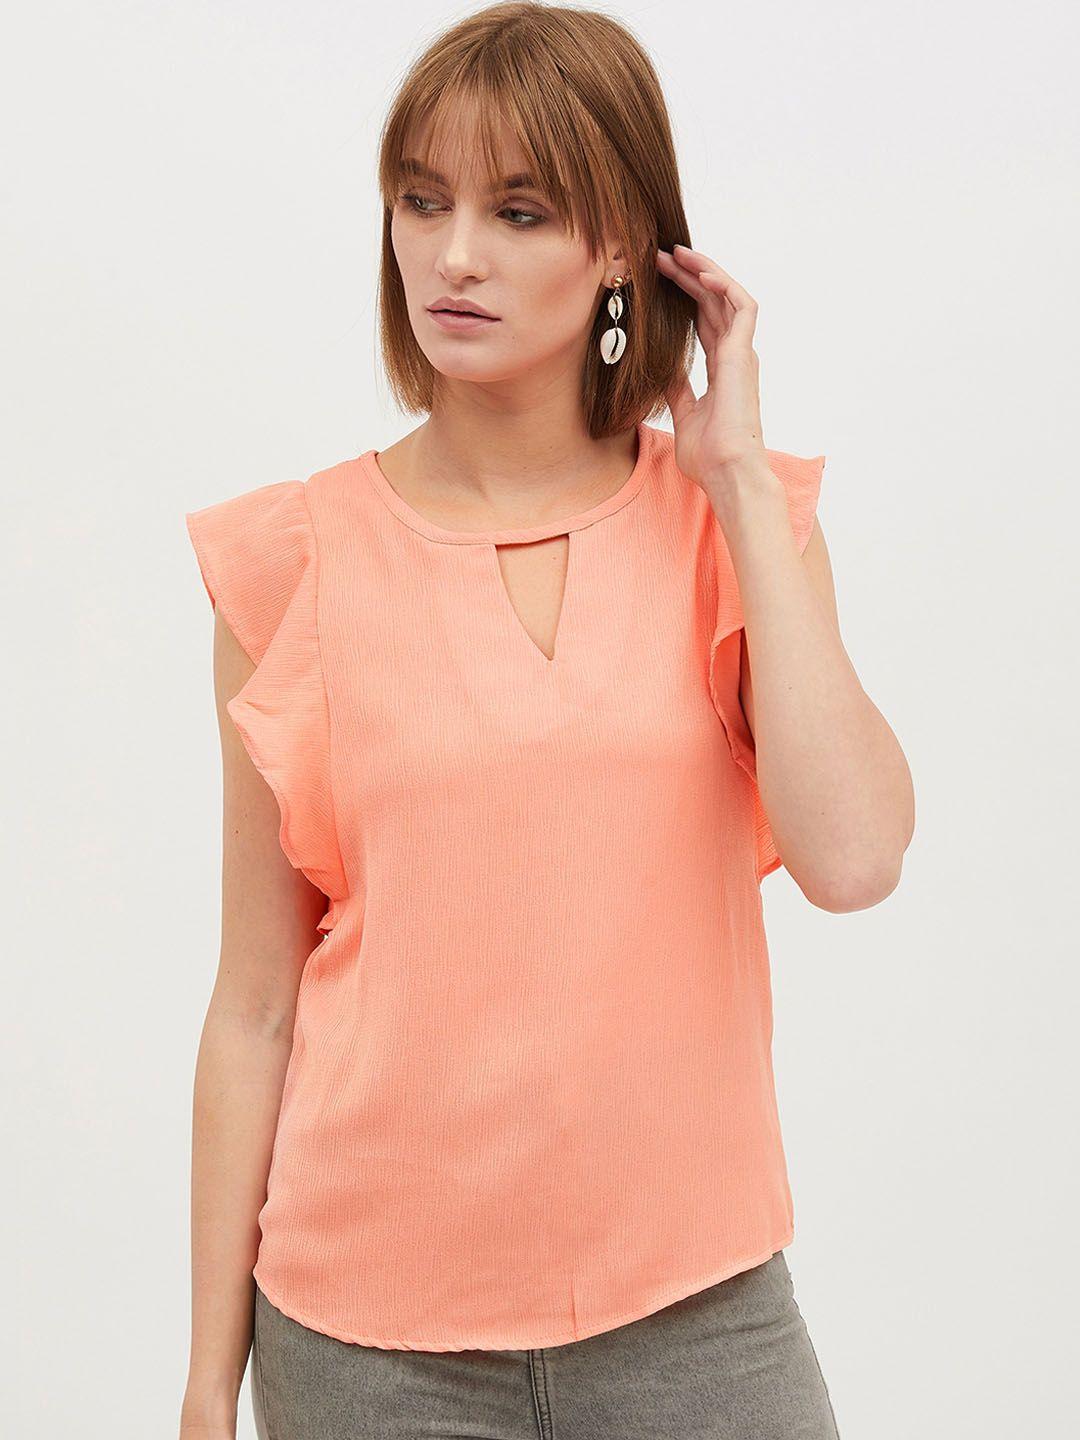 harpa women peach-coloured solid top